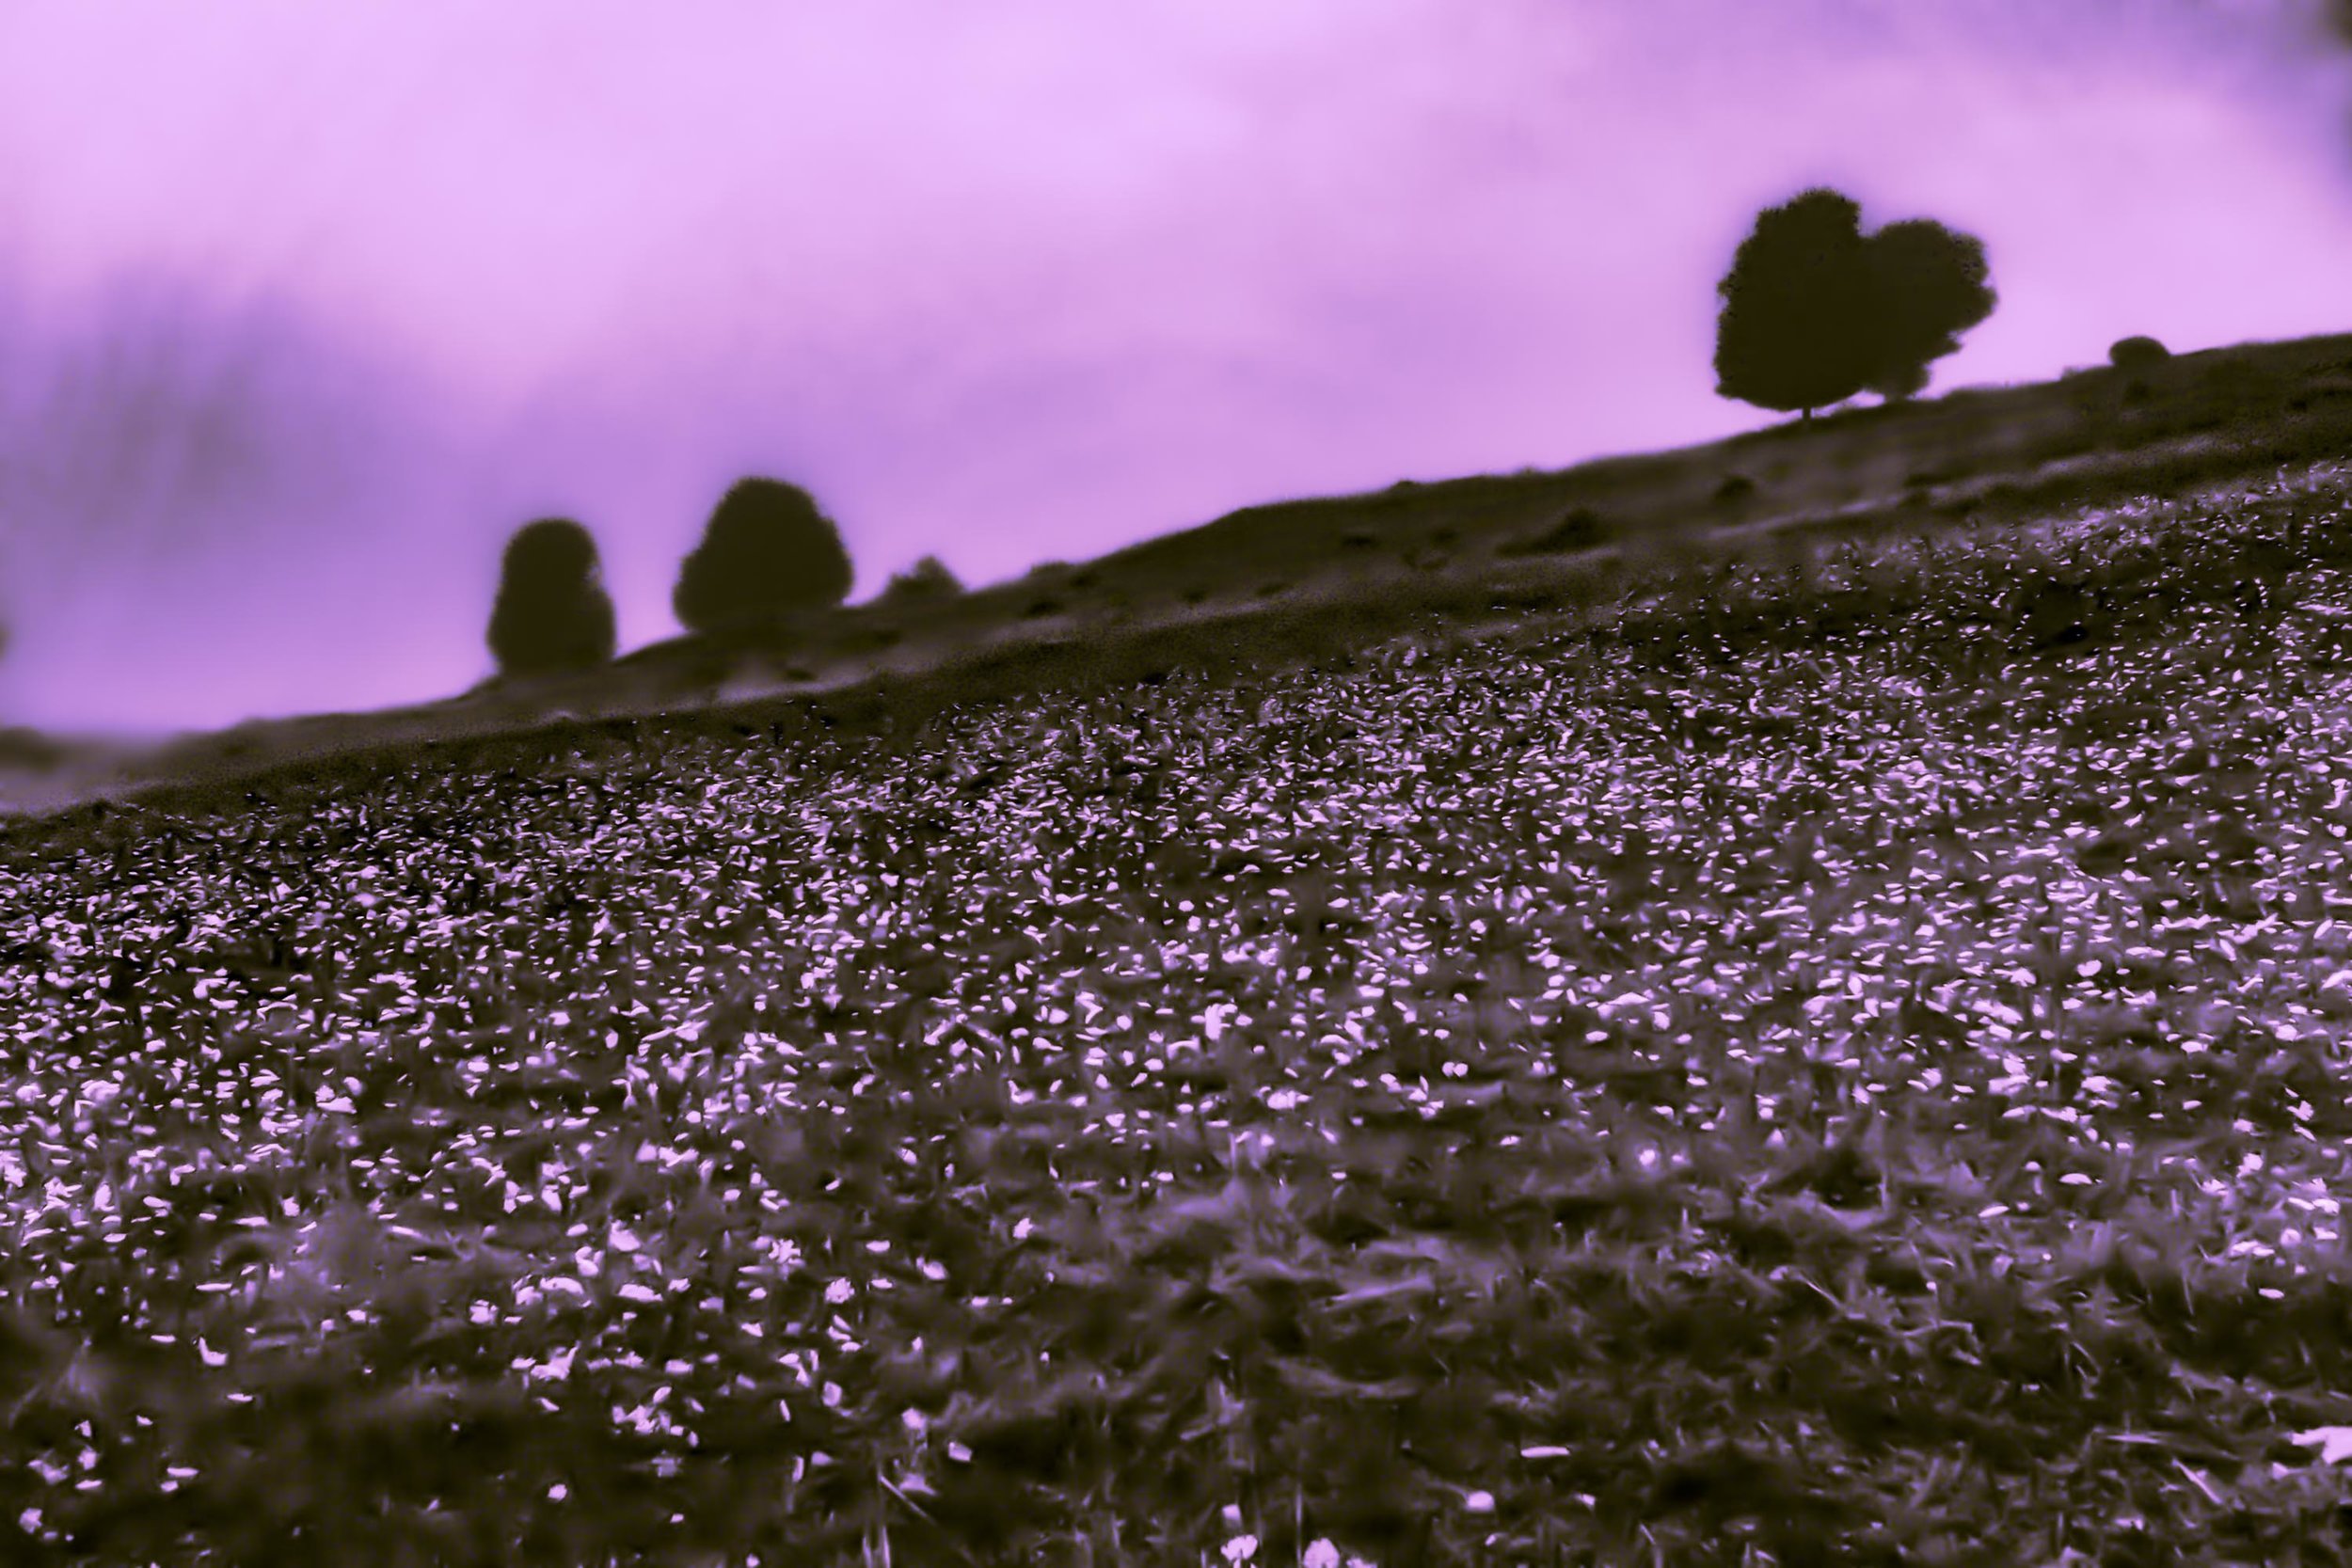 Pink Hill, 2019, print, 40 x 60 in, $6,000 (other sizes available)